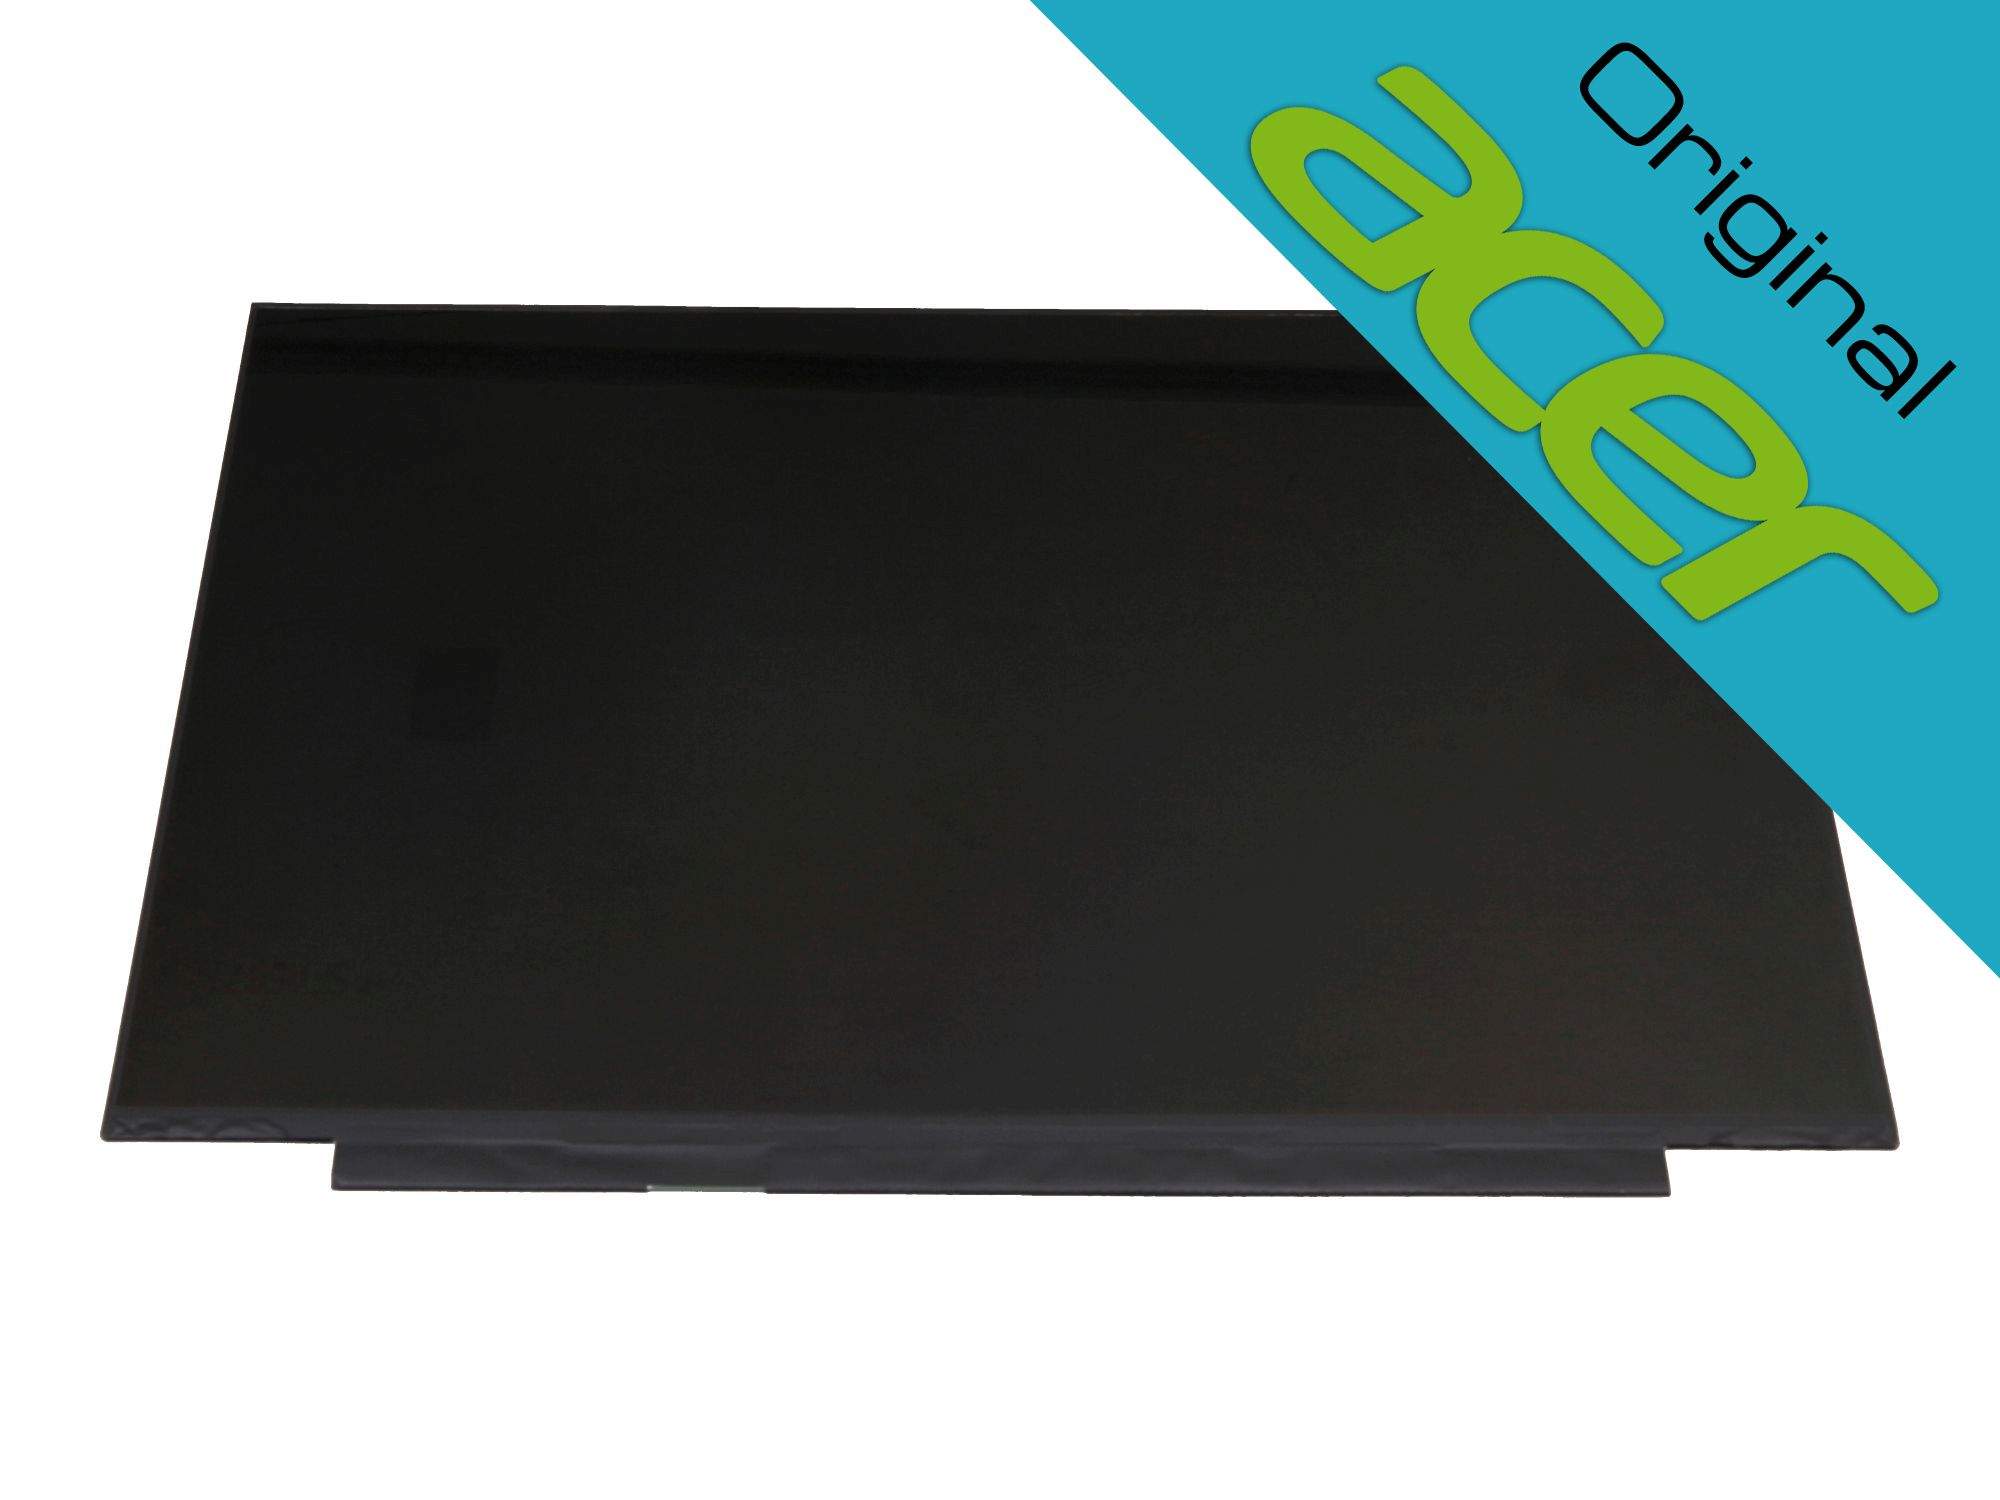 ACER LCD PANEL 17 3 FHD NGL IPS